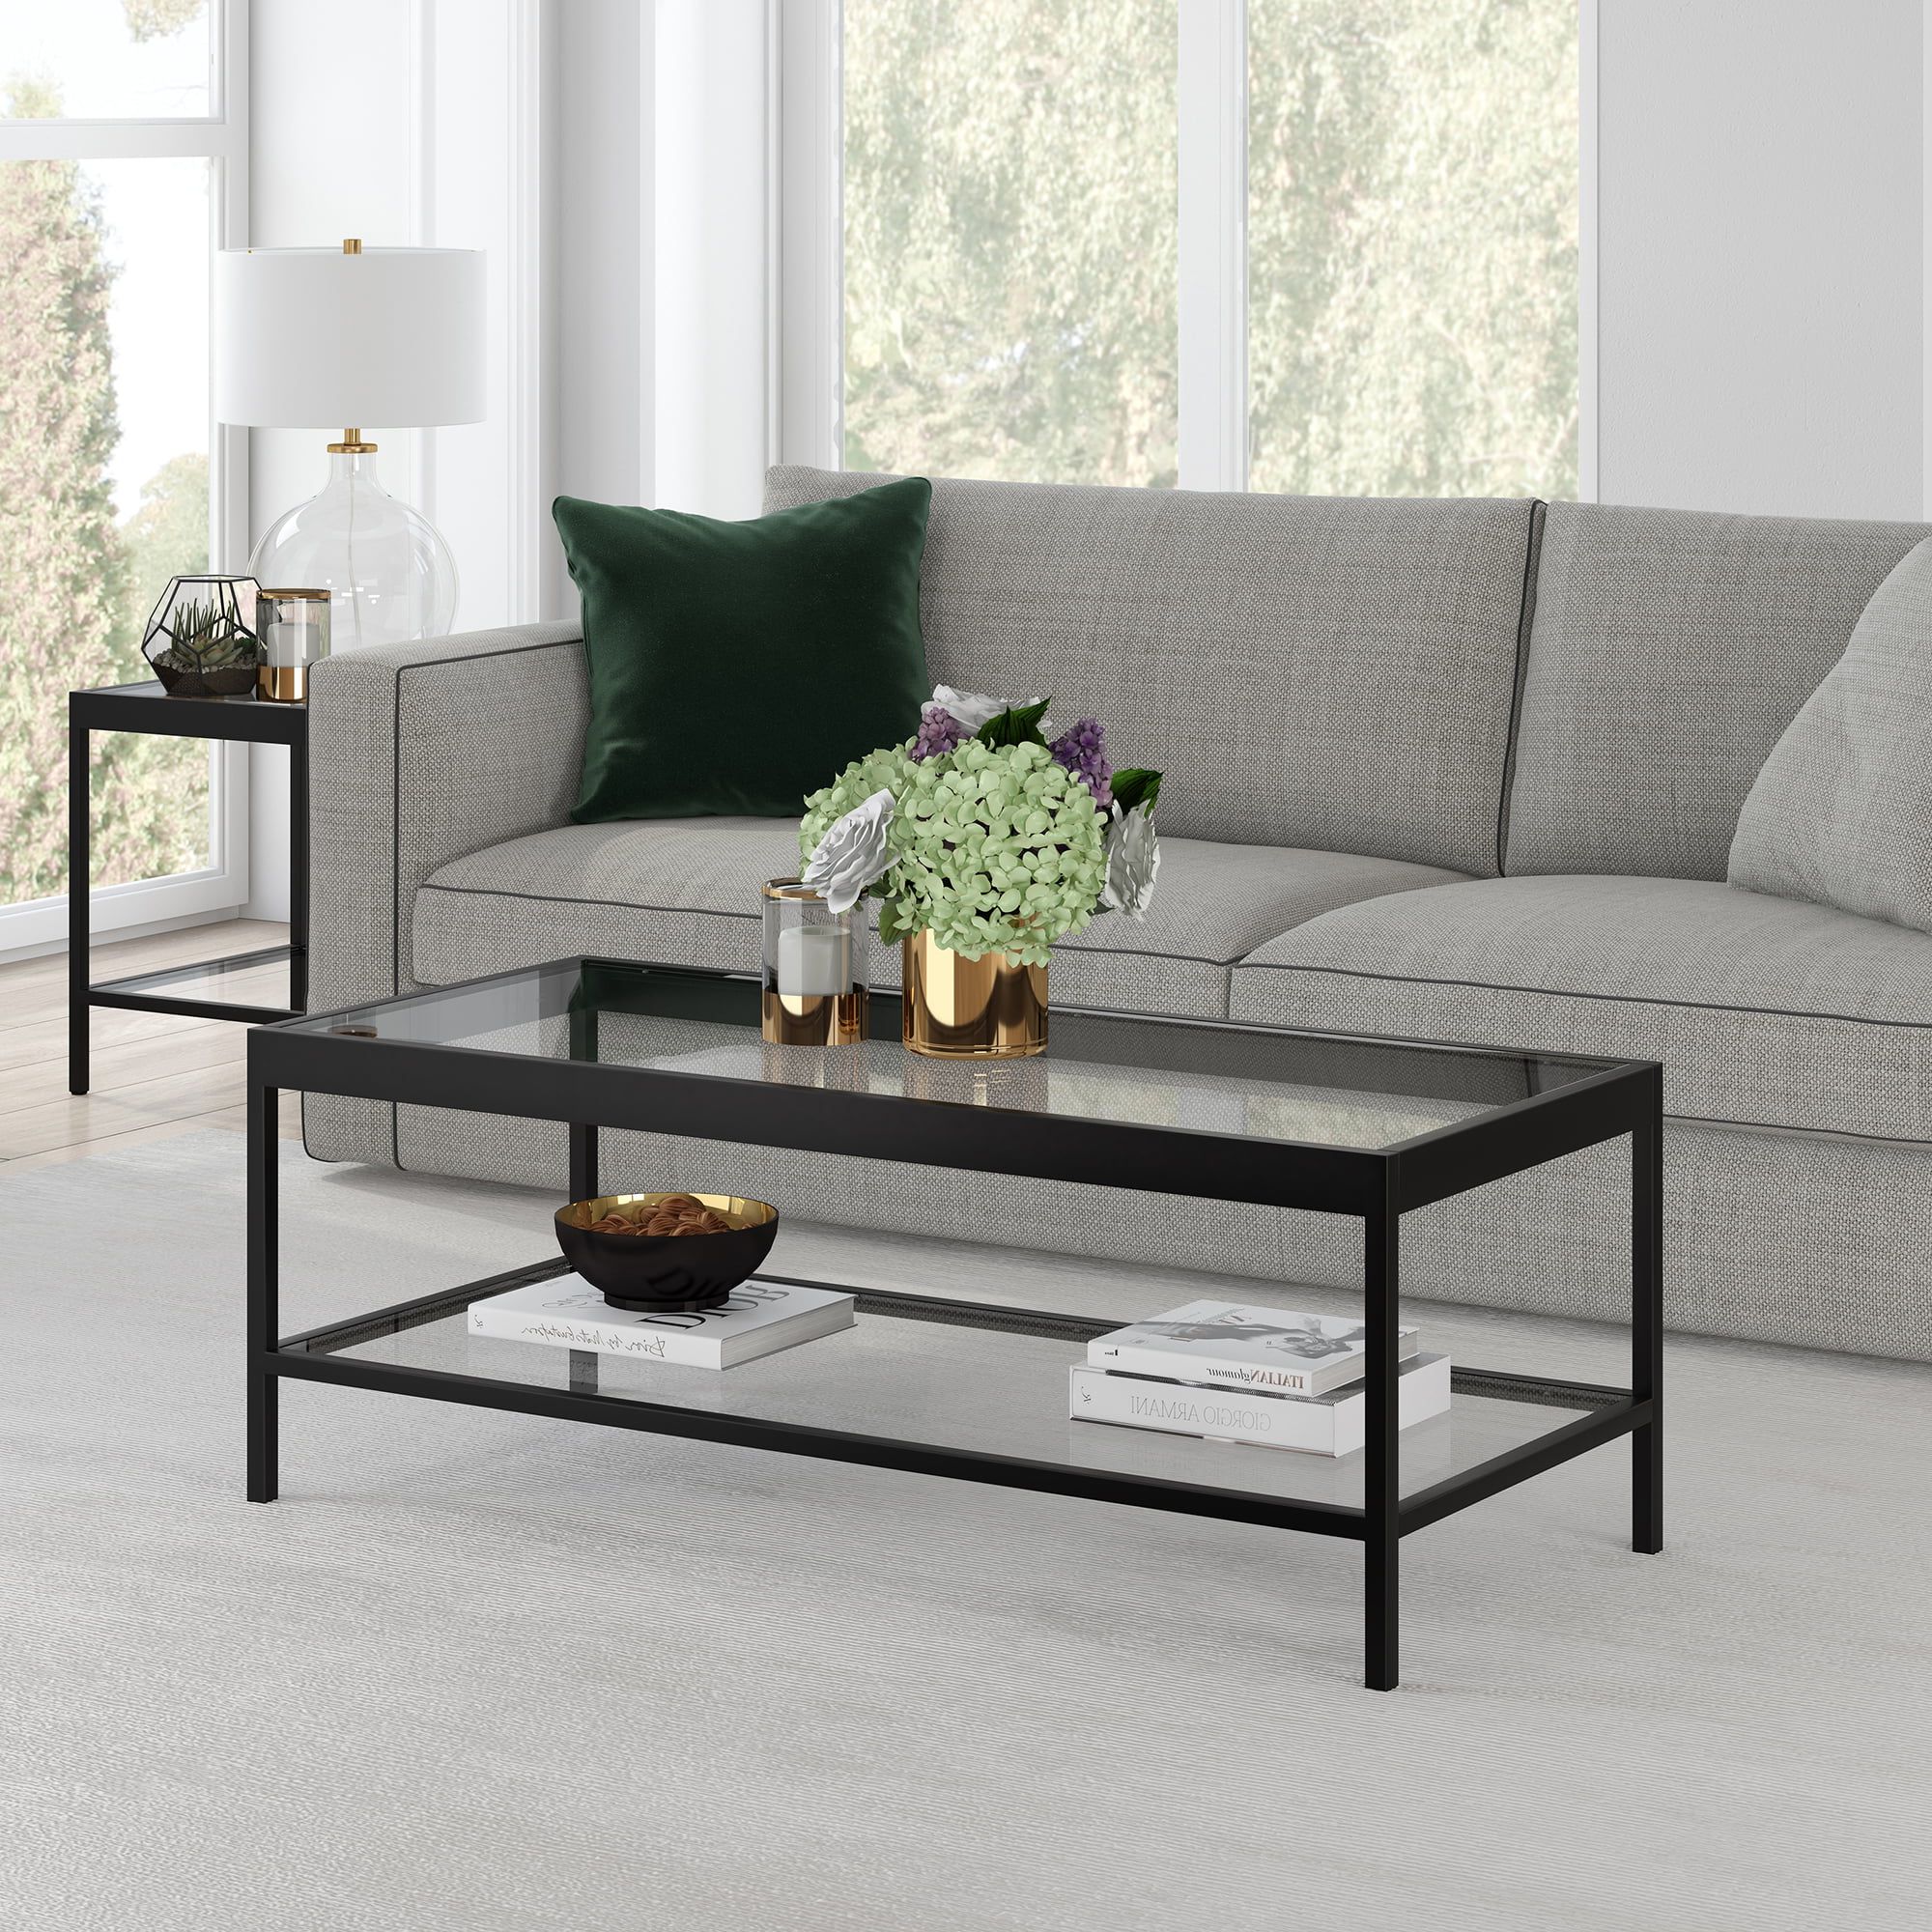 Modern Coffee Table With Open Shelf, Rectangular Table For Living Room In Fashionable Rectangle Coffee Tables (View 4 of 15)